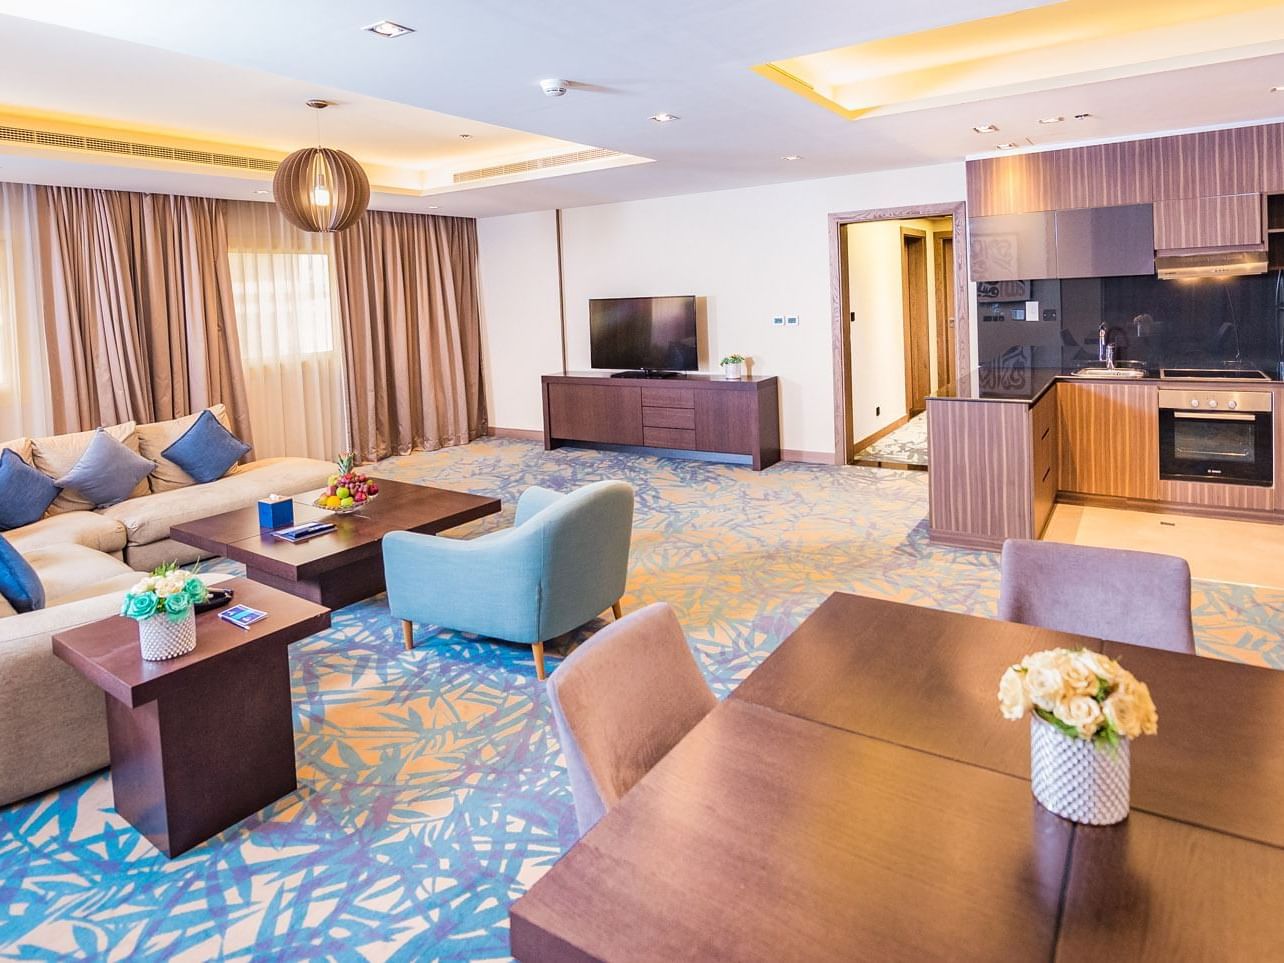 TV & Living area of Executive suite at Mena Plaza Hotel